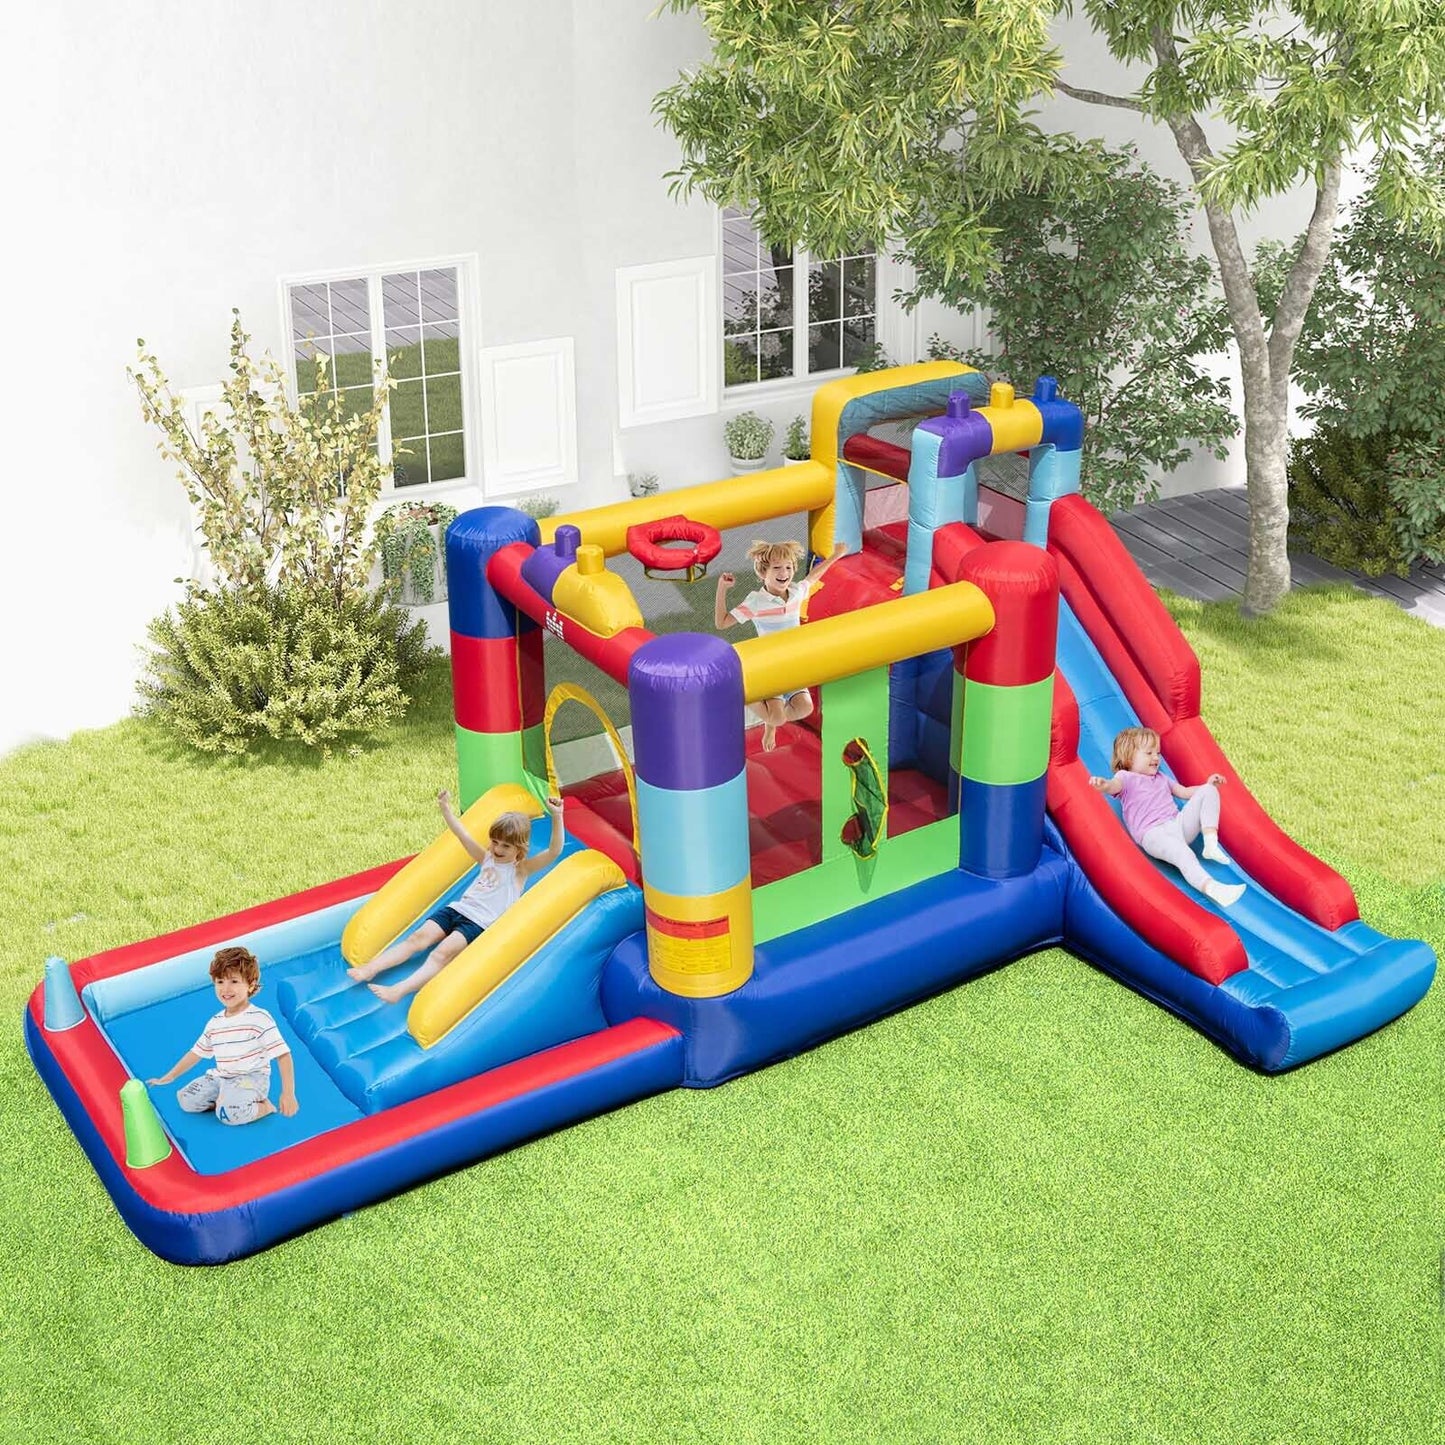 Inflatable Bounce House with 680W Blower and Ball Pit, Multicolor